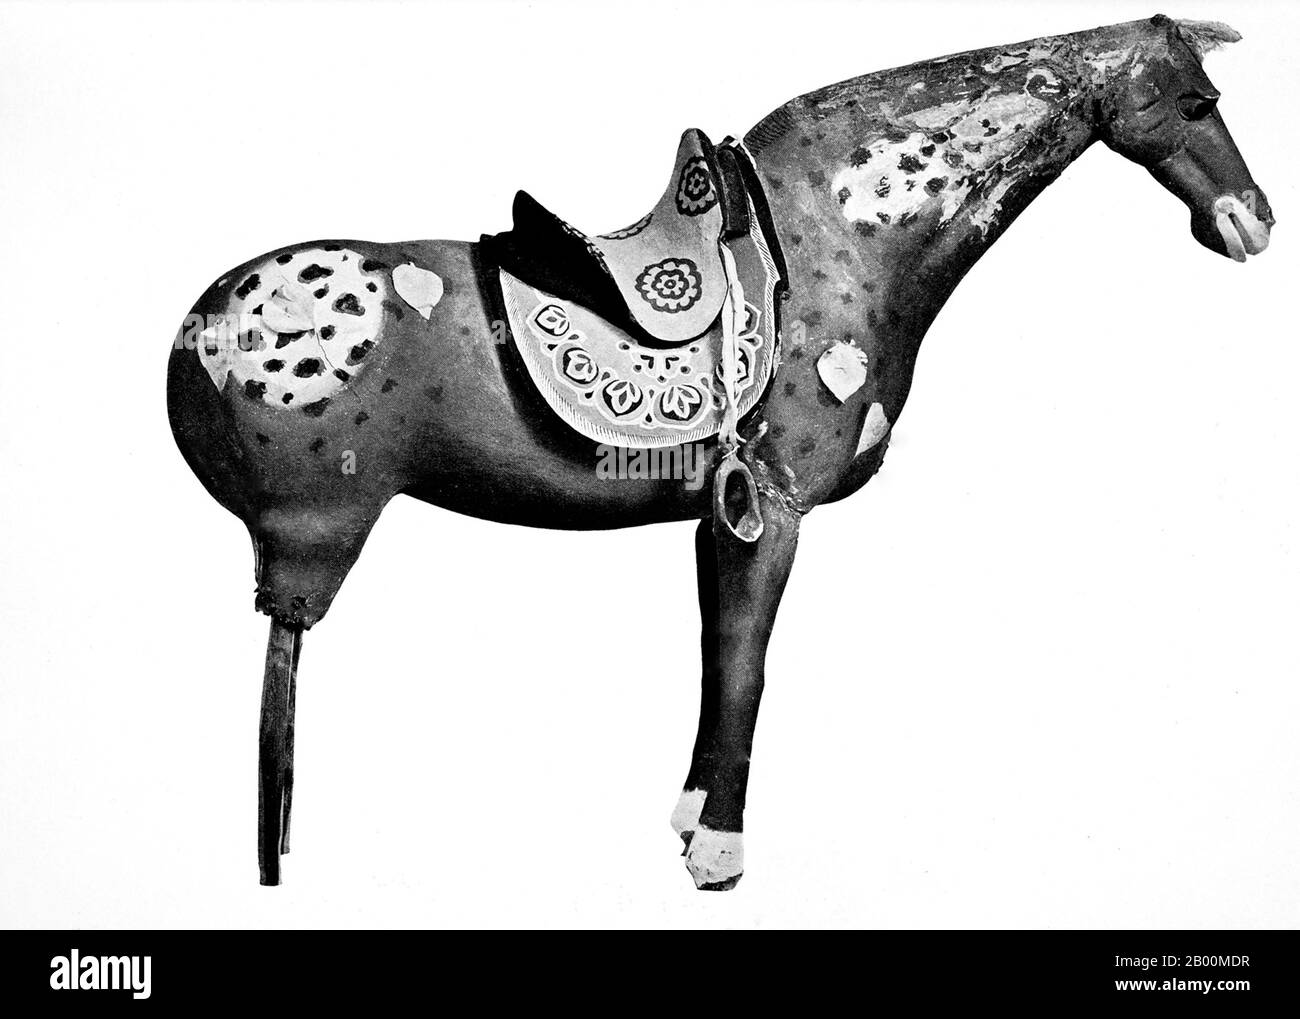 China: Clay model of a horse from Astana Cemetery, Turfan, Xinjiang.  The Astana Graves are a series of underground tombs located 6km from the ancient city of Gaochang, and 42km from Turpan, in Xinjiang, China. The tombs were used by the inhabitants of Gaochang, both commoners and locals, for about 600 years from 200 CE – 800 CE. Stock Photo